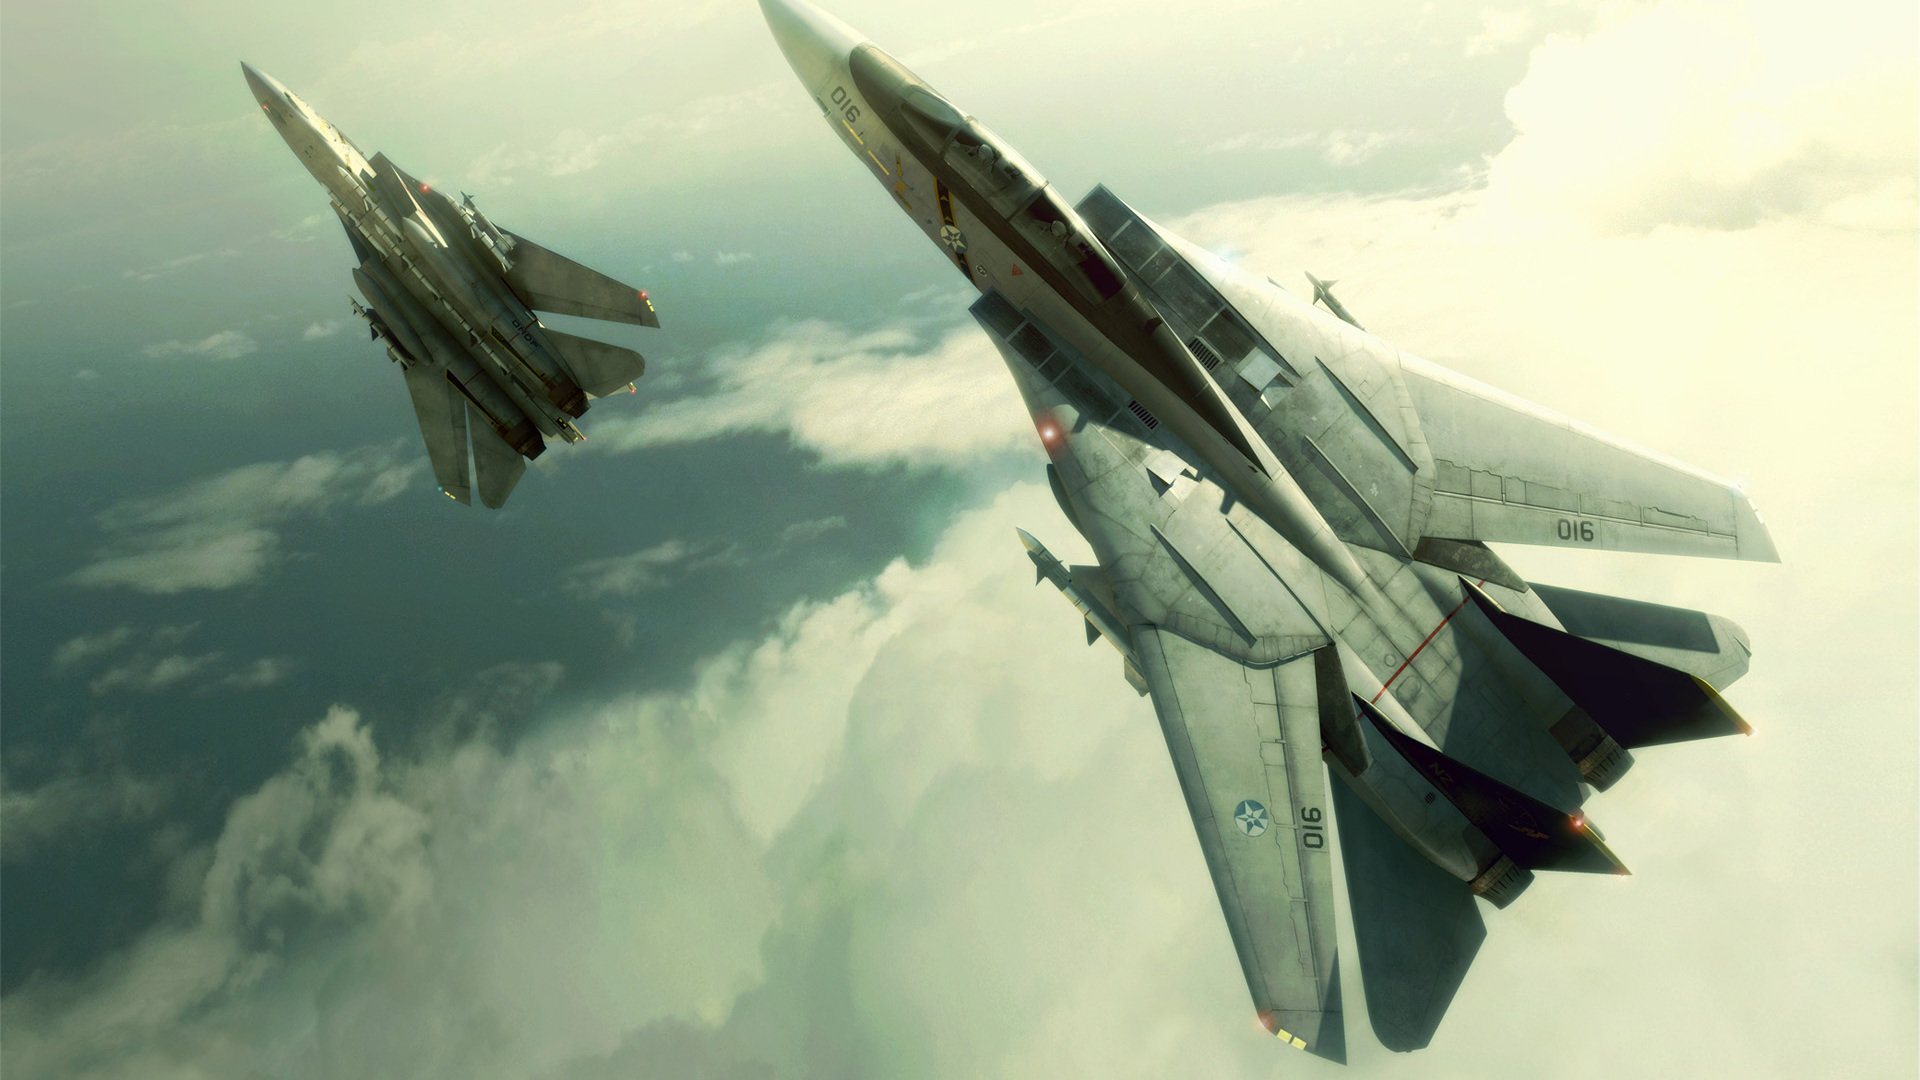 Download full hd 1920x1080 Ace Combat desktop background ID:429926 for free